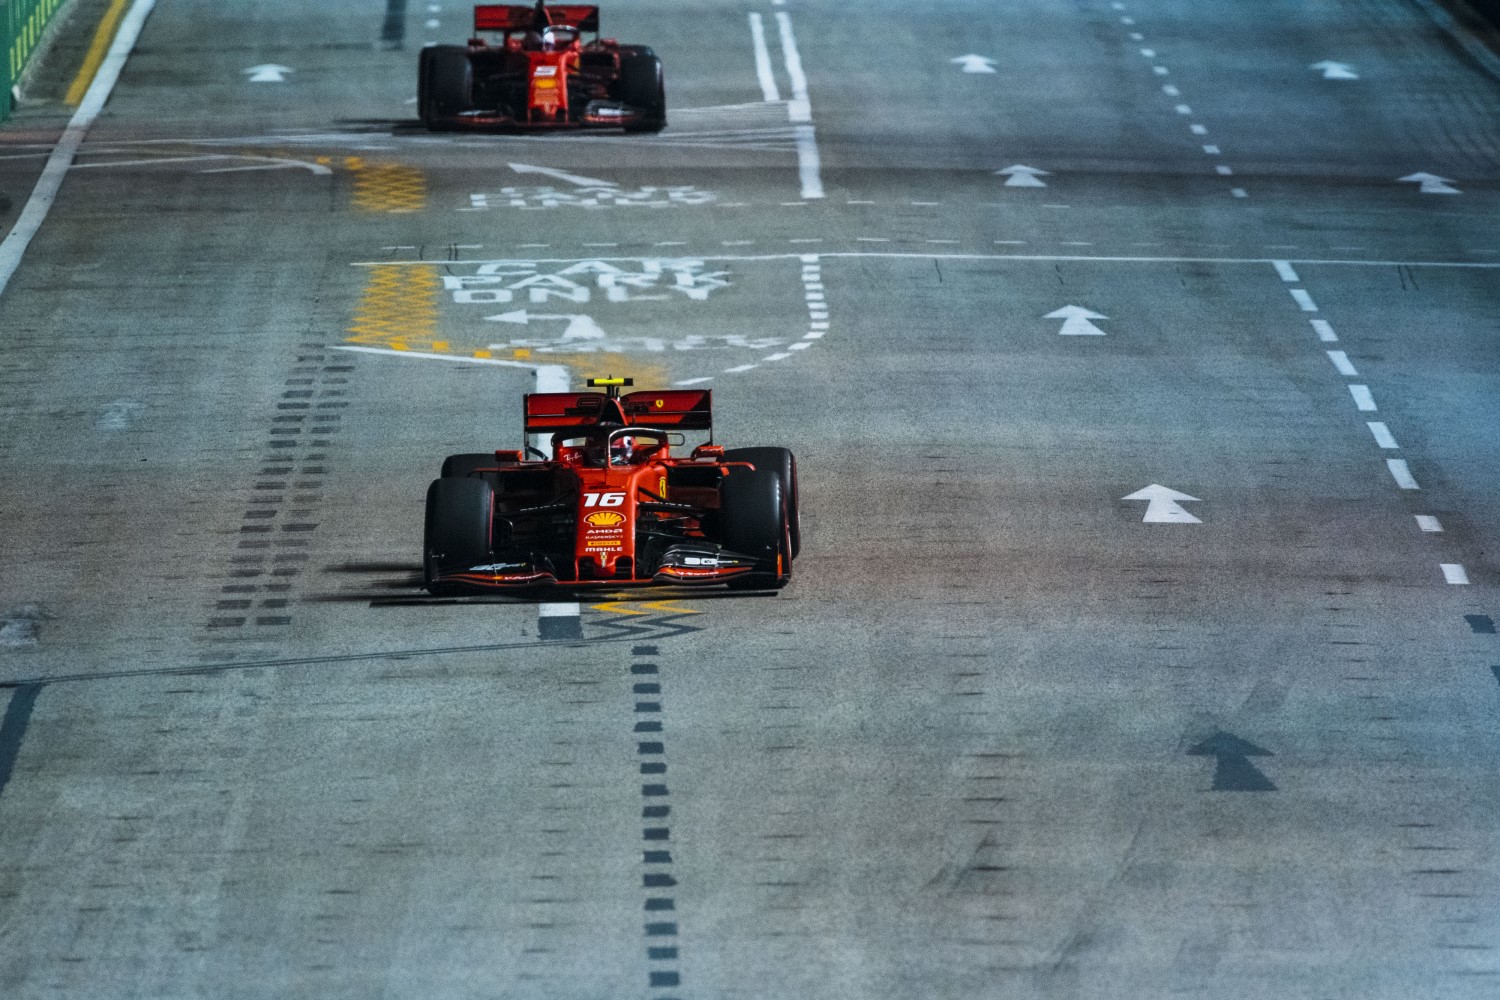 The more the Ferrari drivers take points away from each other, the more Hamilton will win the championship by